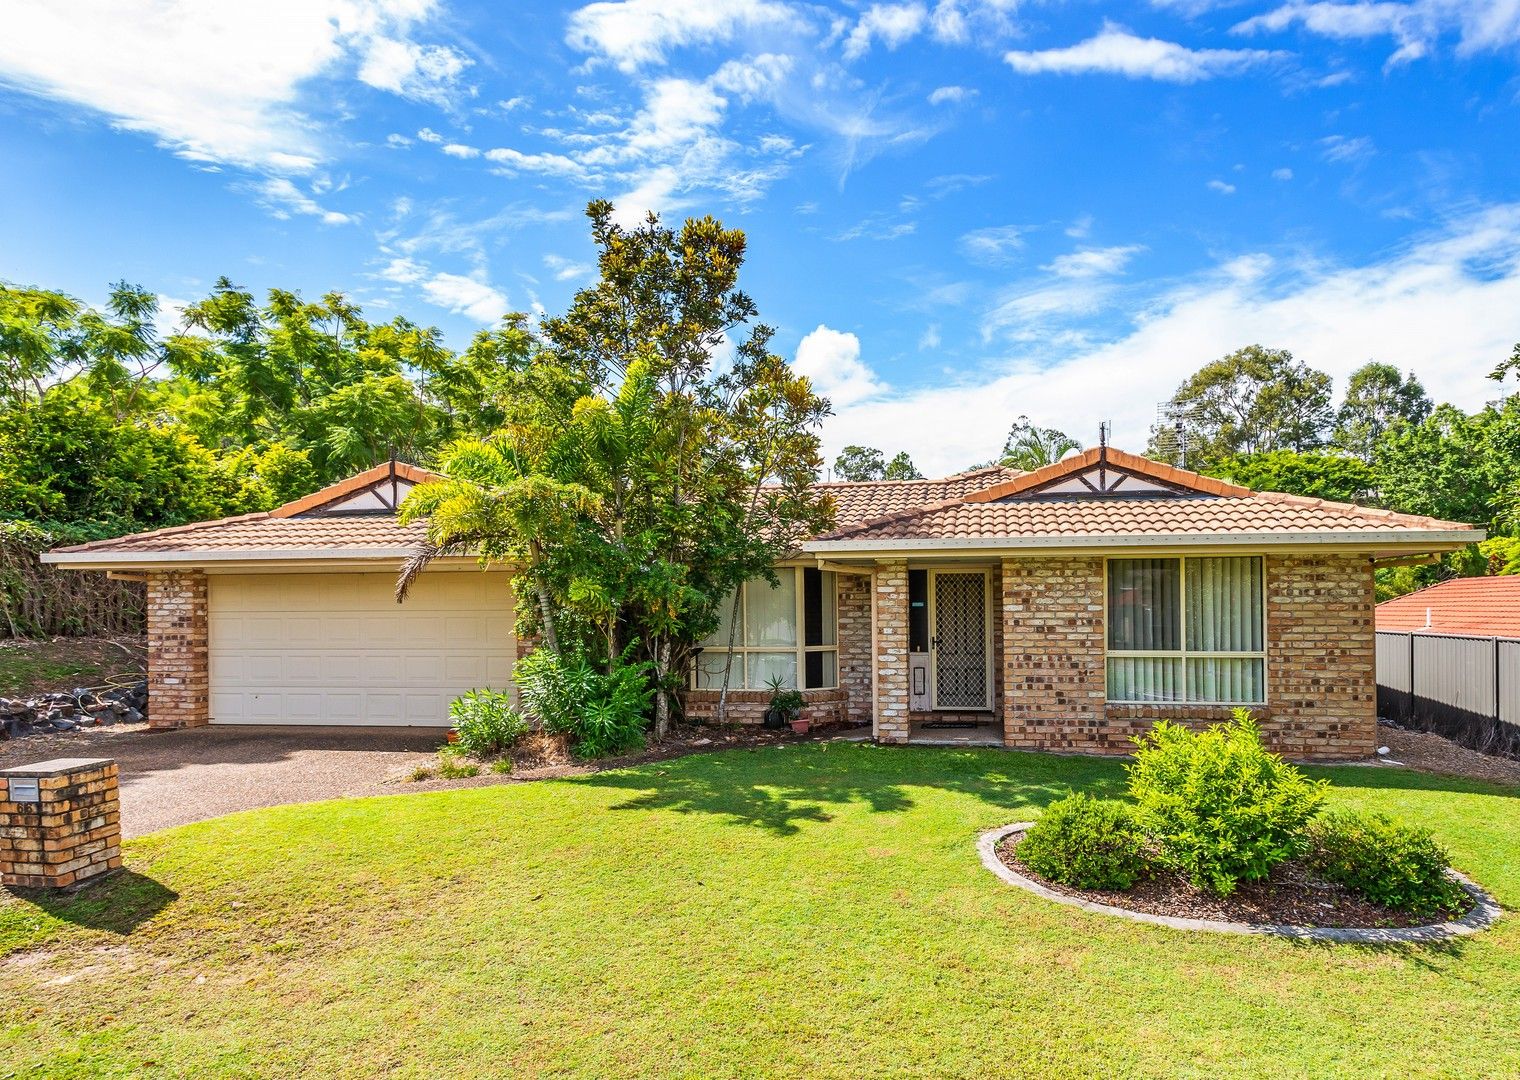 66 Pacific Pines Blvd, Pacific Pines QLD 4211, Image 0